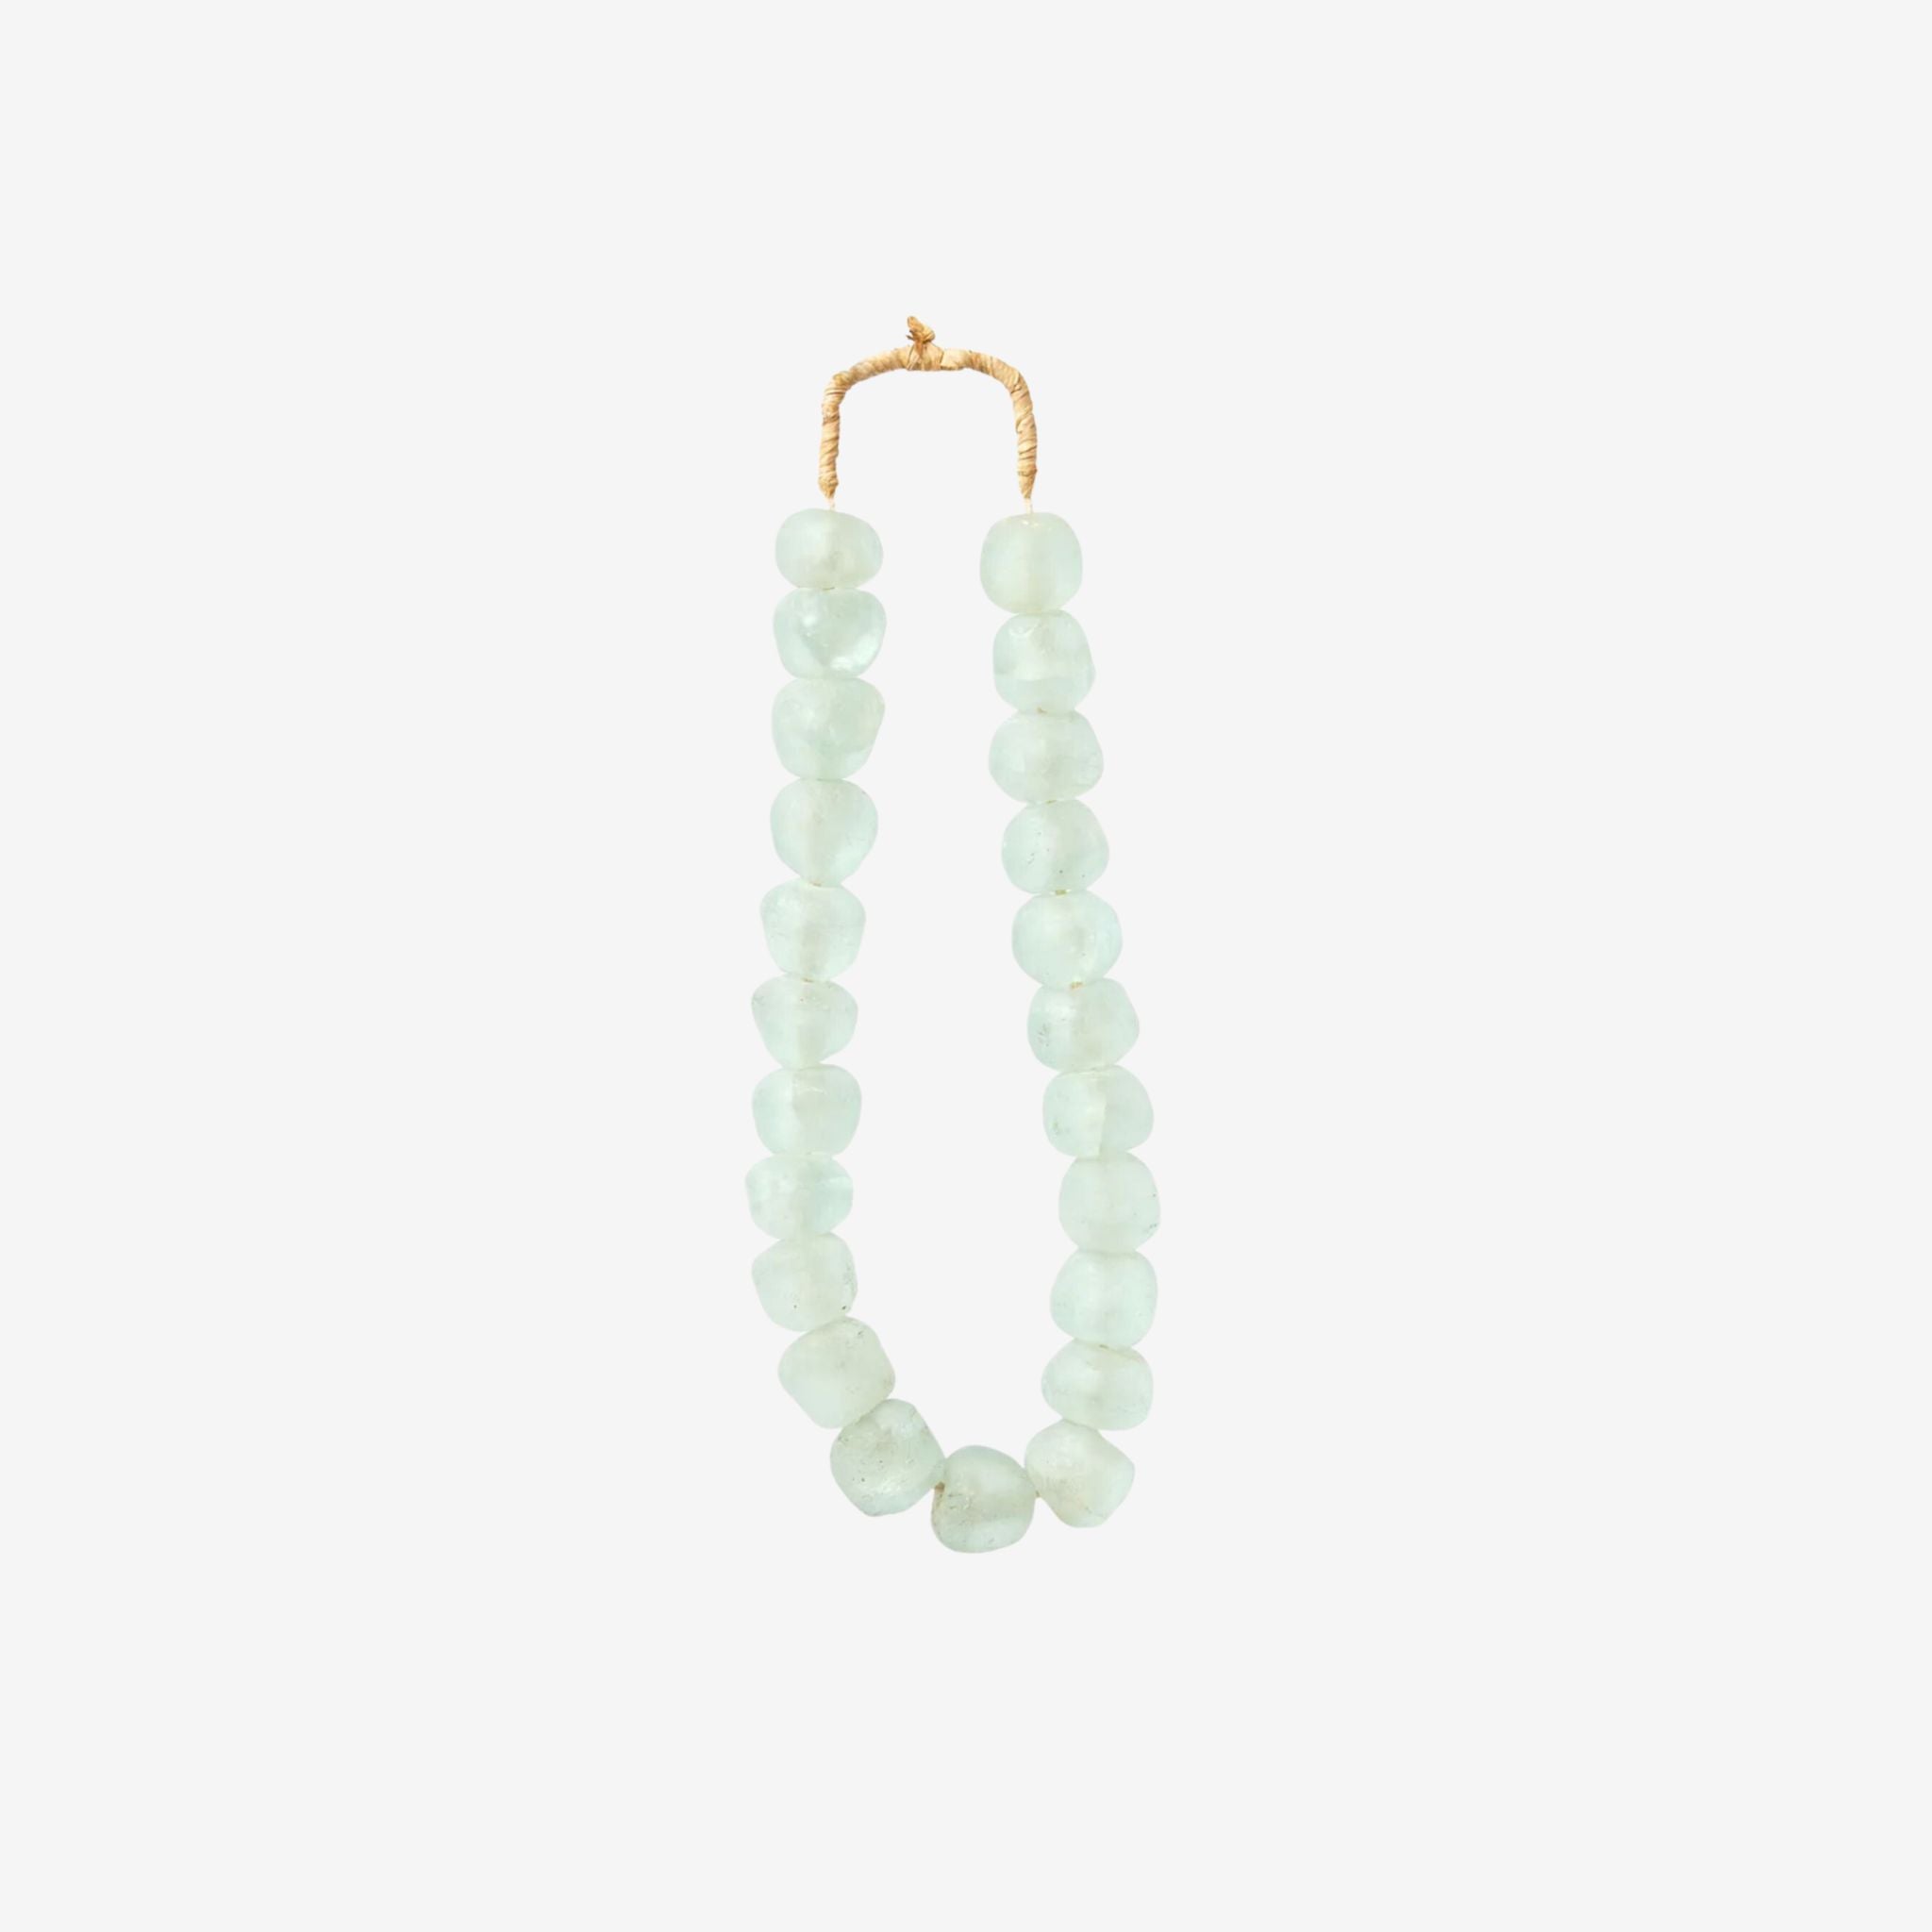 AQUA RECYCLED GLASS BEADS - Simply Elevated Home Furnishings 